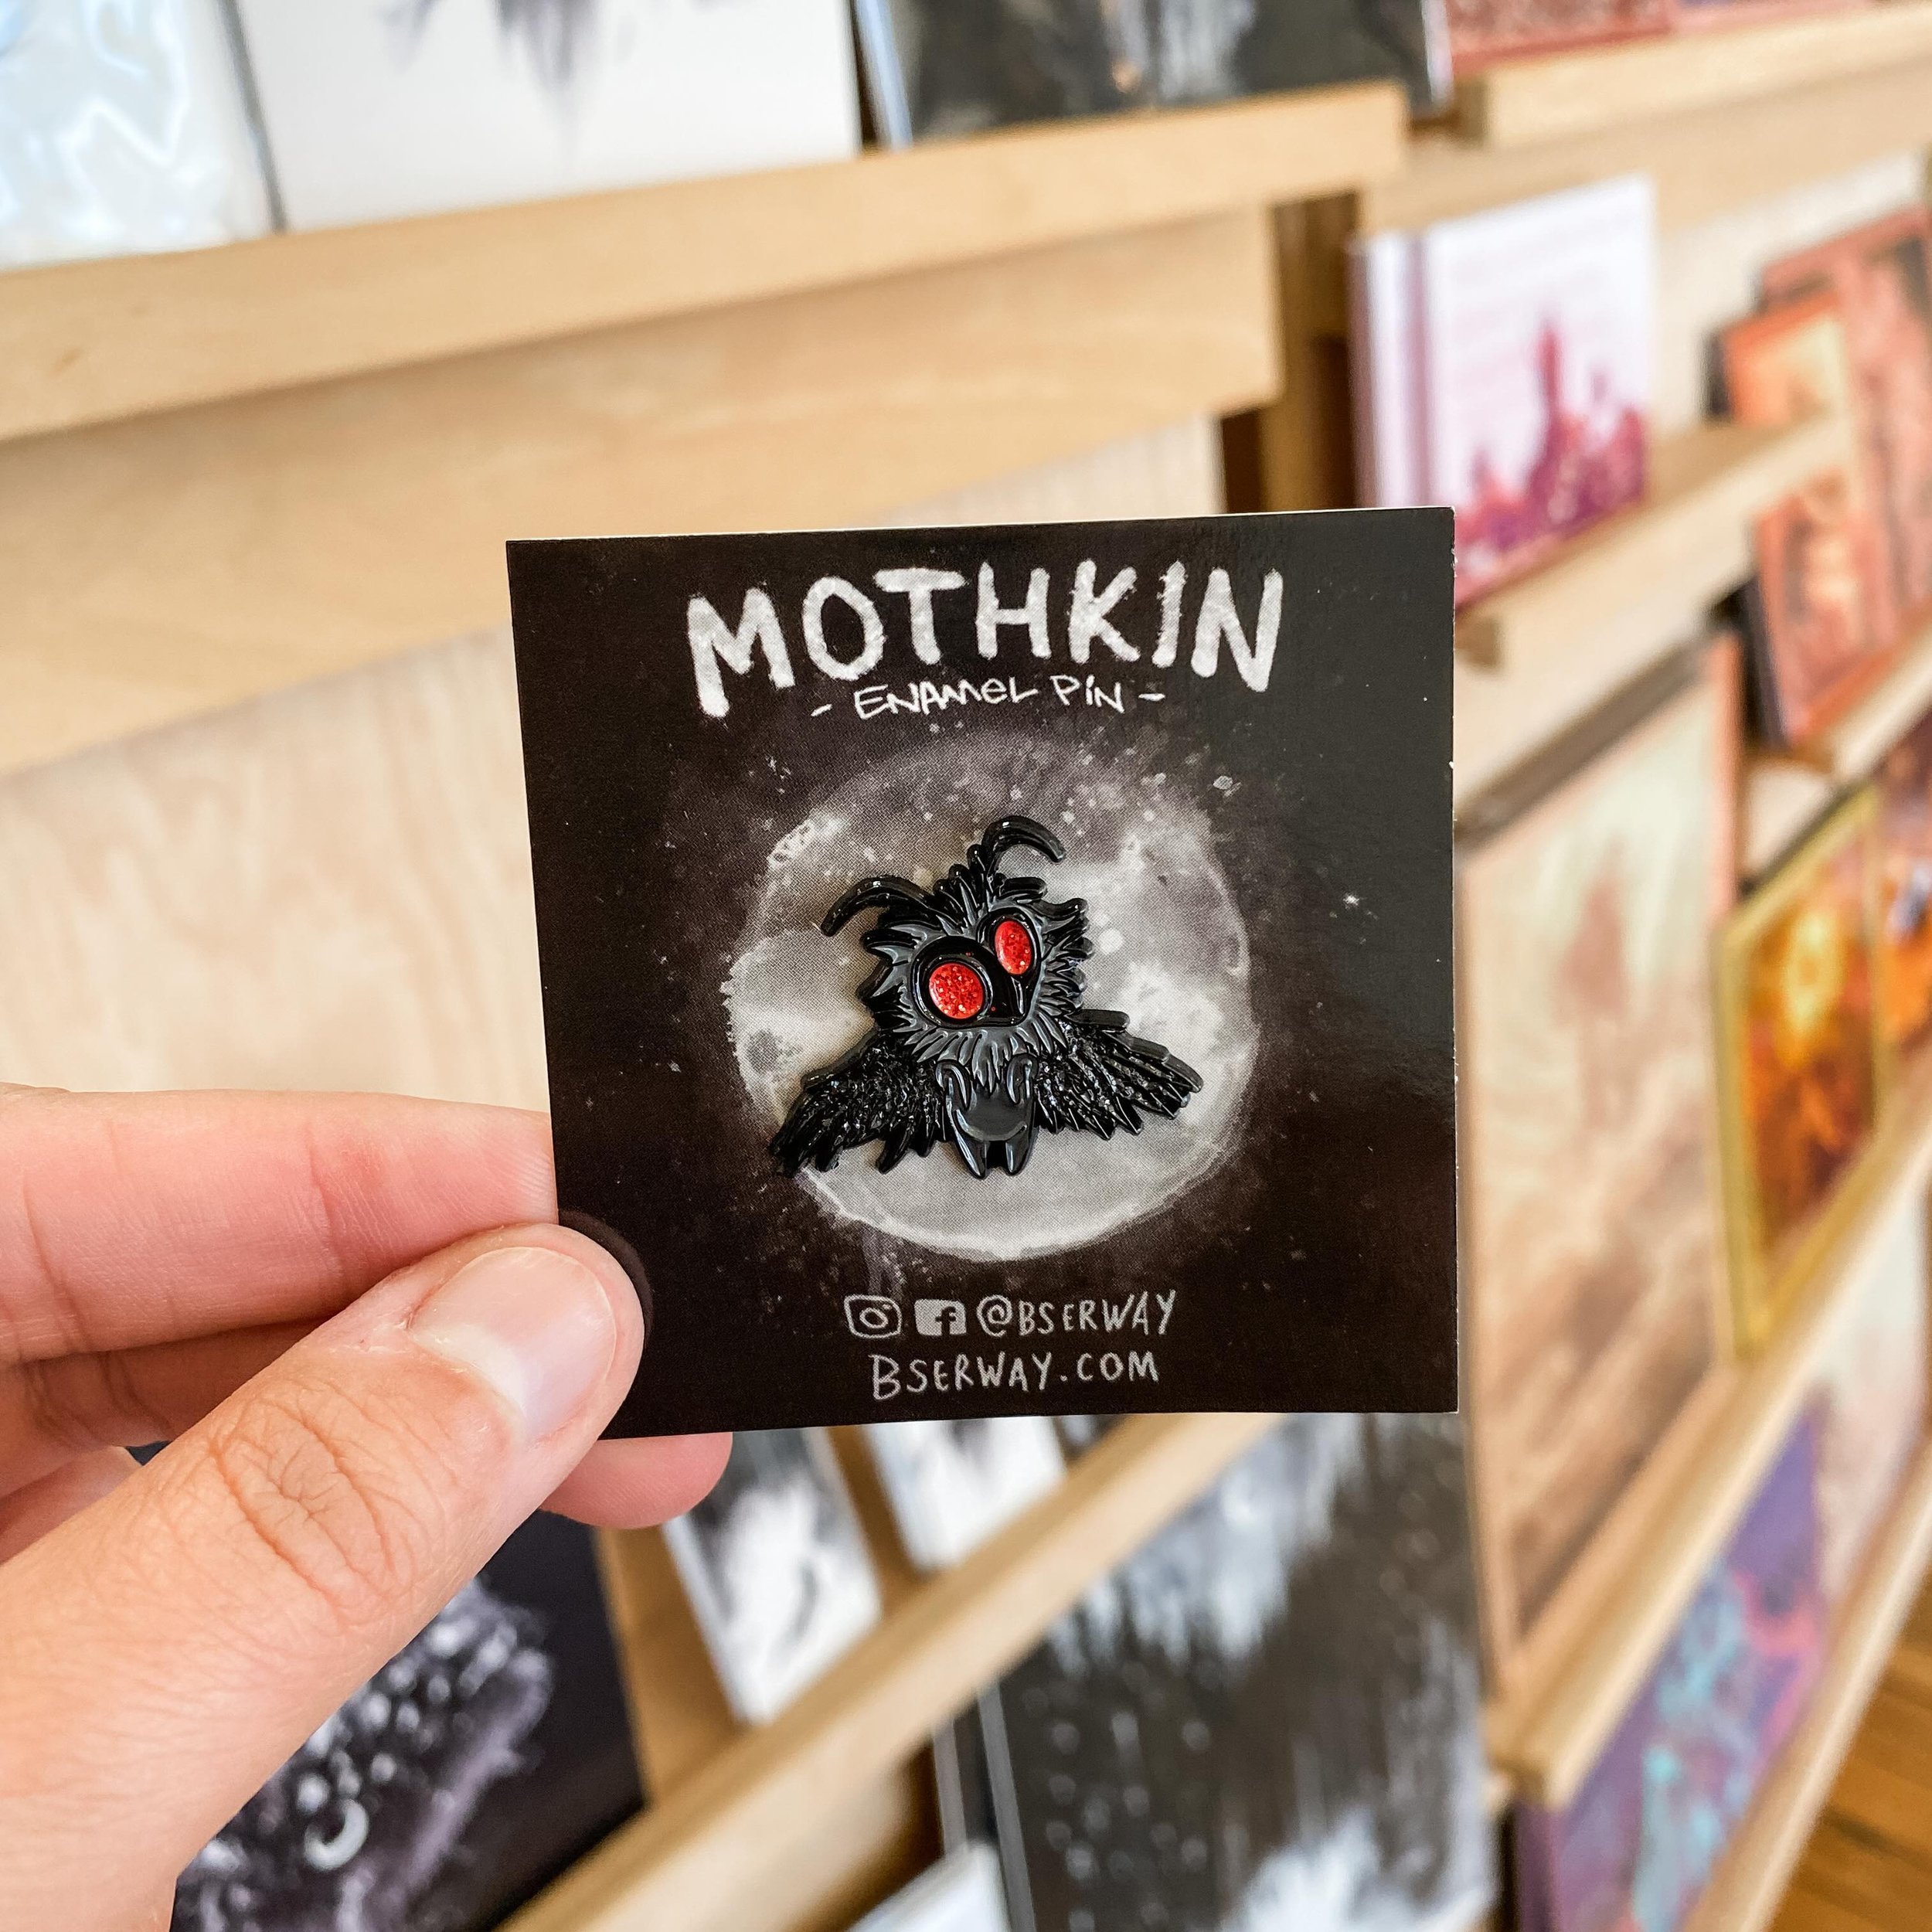 Lucky you! 🙌 Your feed has been blessed with this new Mothkin pin from @bserway. Stop in and pick one up for yourself, we&rsquo;re open until 6pm tonight and 11-7 tomorrow! 

#LiveLoveMOV #MariettaOhio #MyMarietta #ArtShop #SupportArtists  #ShopSmal